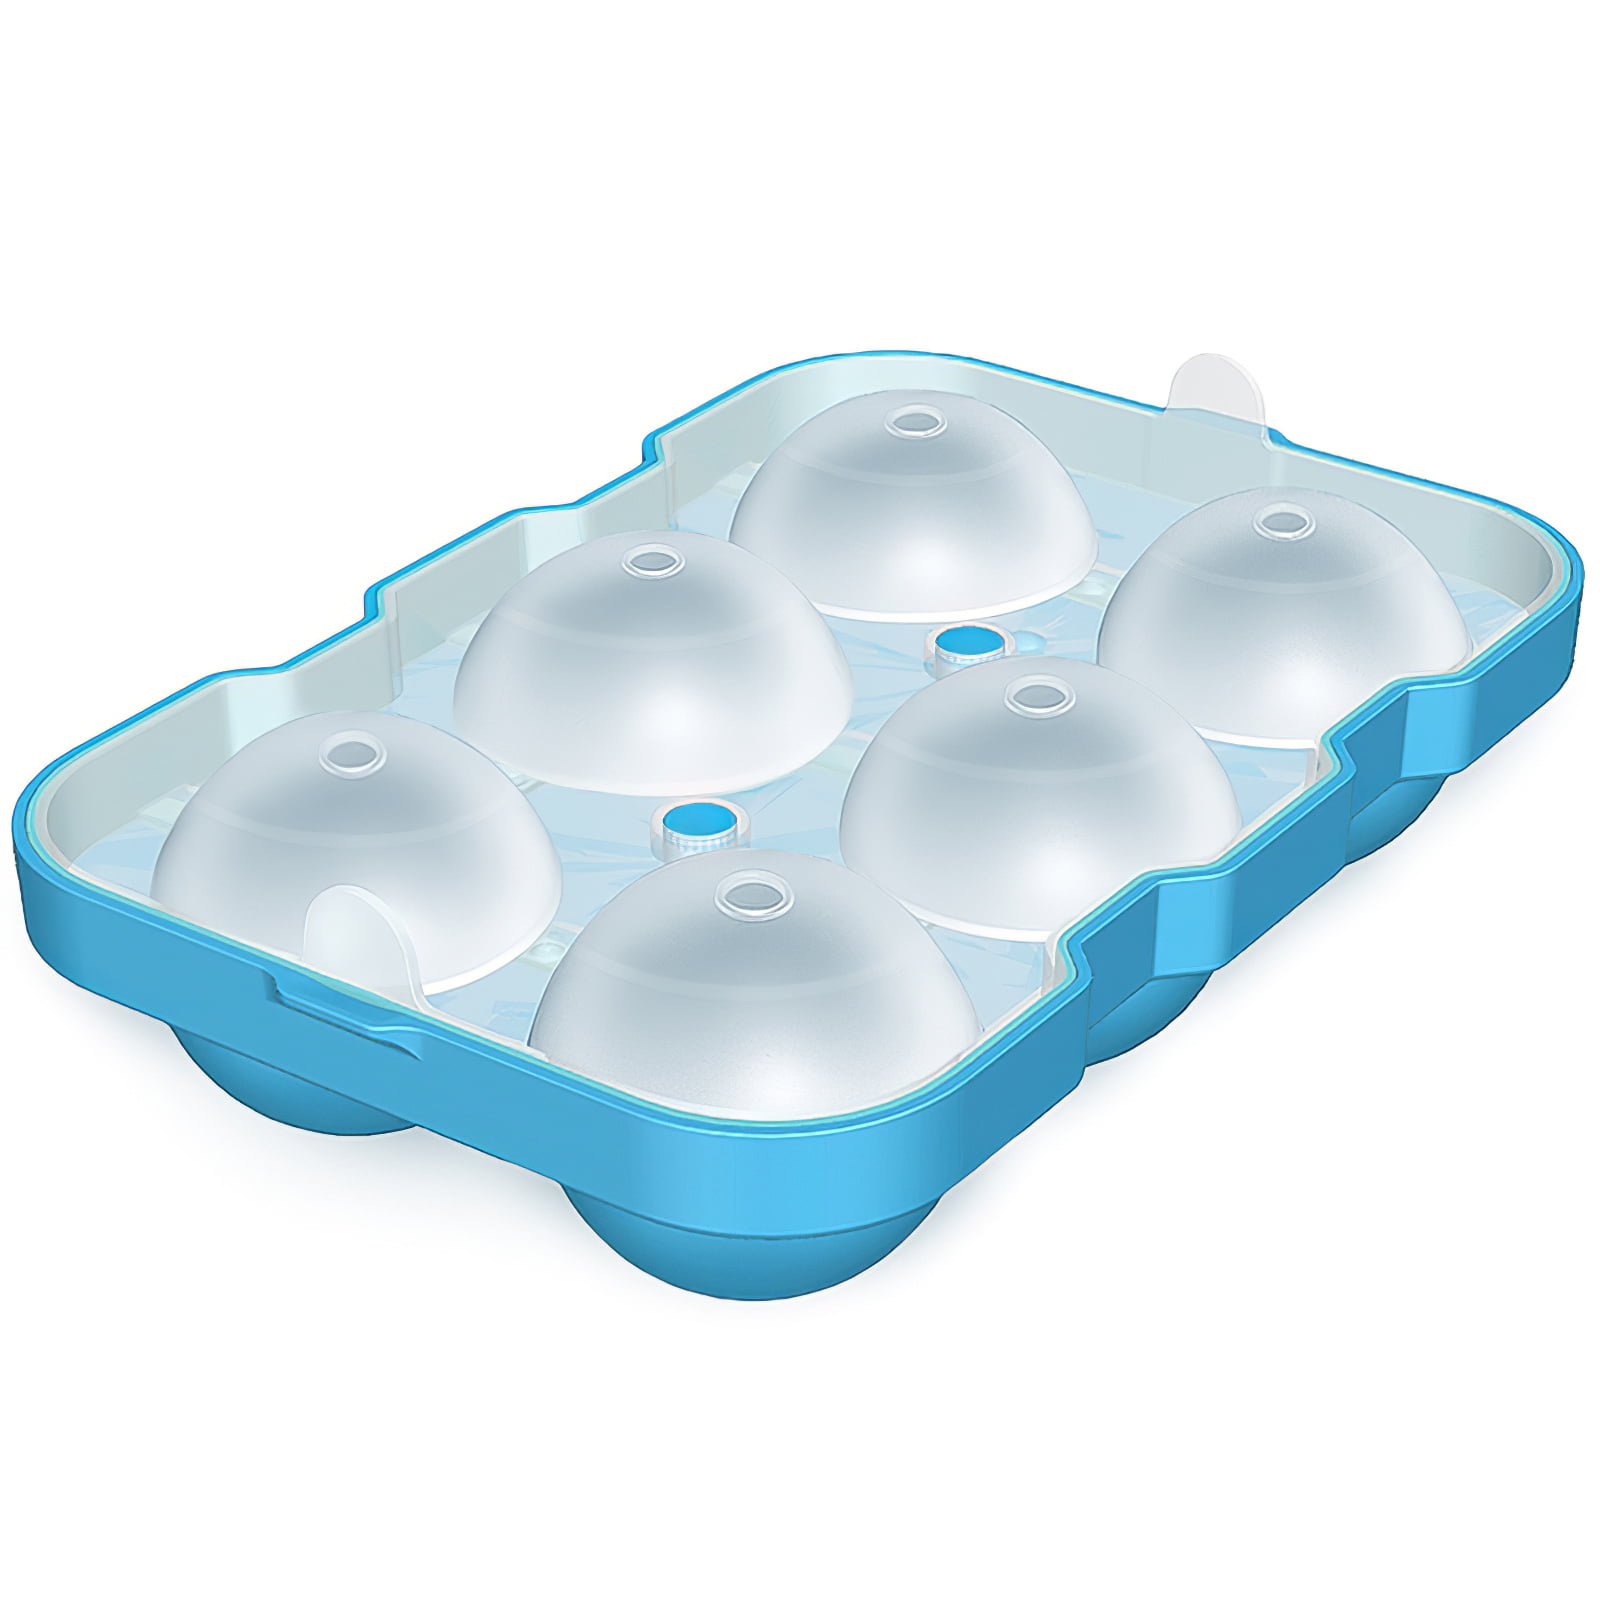 Lemonbest 6 Grids Ice Cube Mold Ice Ball Maker Good Sealing Ice Cube Tray DIY for Kitchen Bakery Making Dessert Jelly Candy - Walmart.com